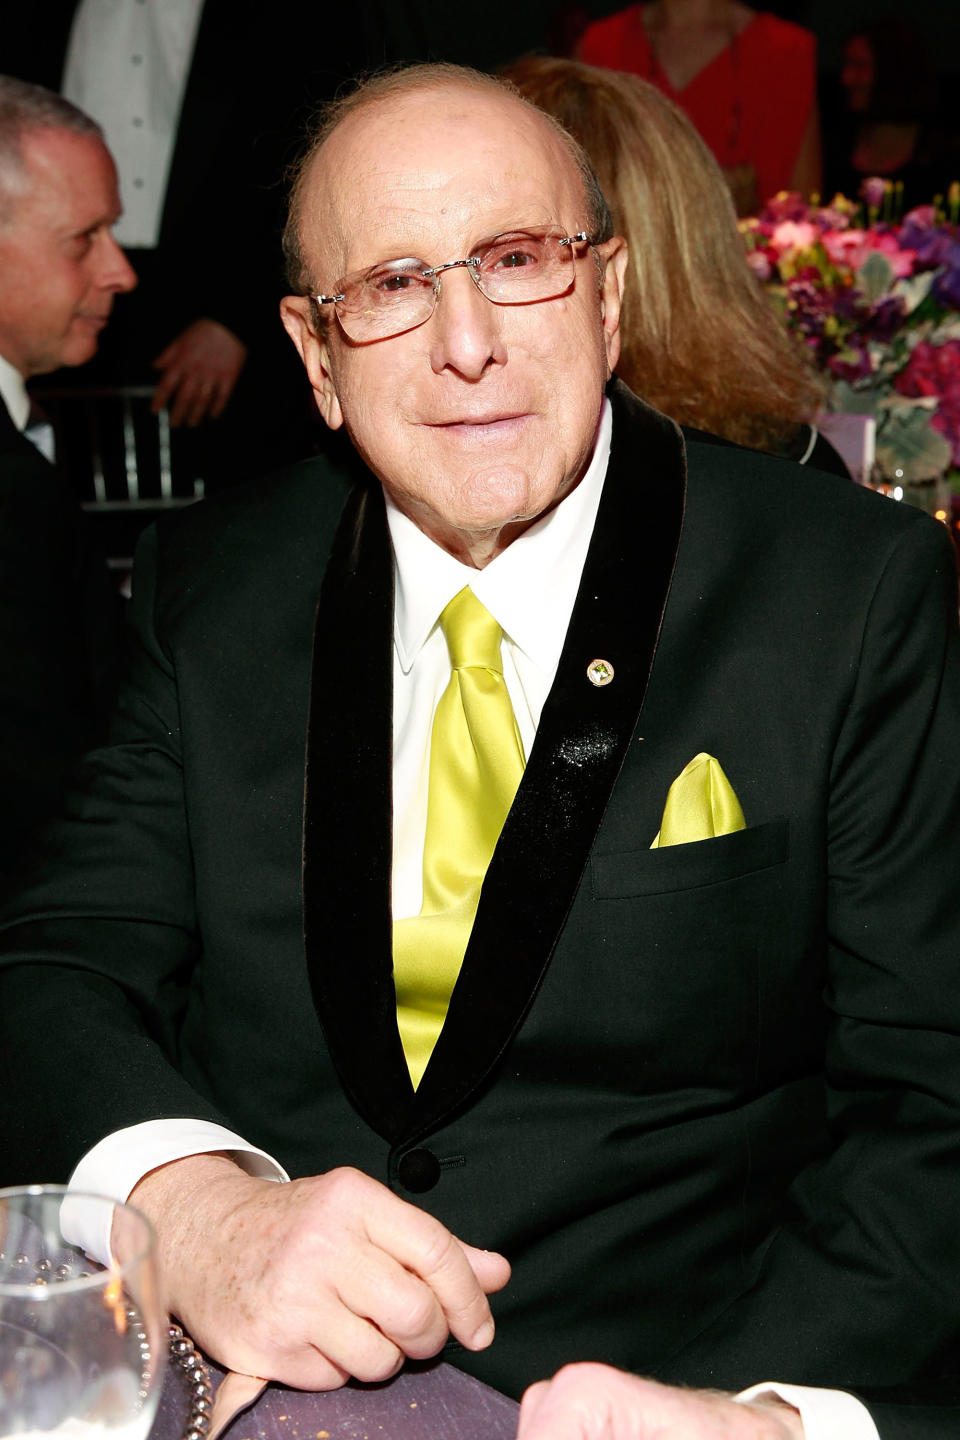 Twice-married record executive and music mogul Clive Davis <a href="http://www.huffingtonpost.com/2013/02/19/clive-davis-bisexual-_n_2718529.html" target="_blank">came out as bisexual</a> in his 2013 memoir, titled <em>The Soundtrack Of My Life</em>. Davis opened up about two long-term relationships he had with men after his divorce from his second wife.